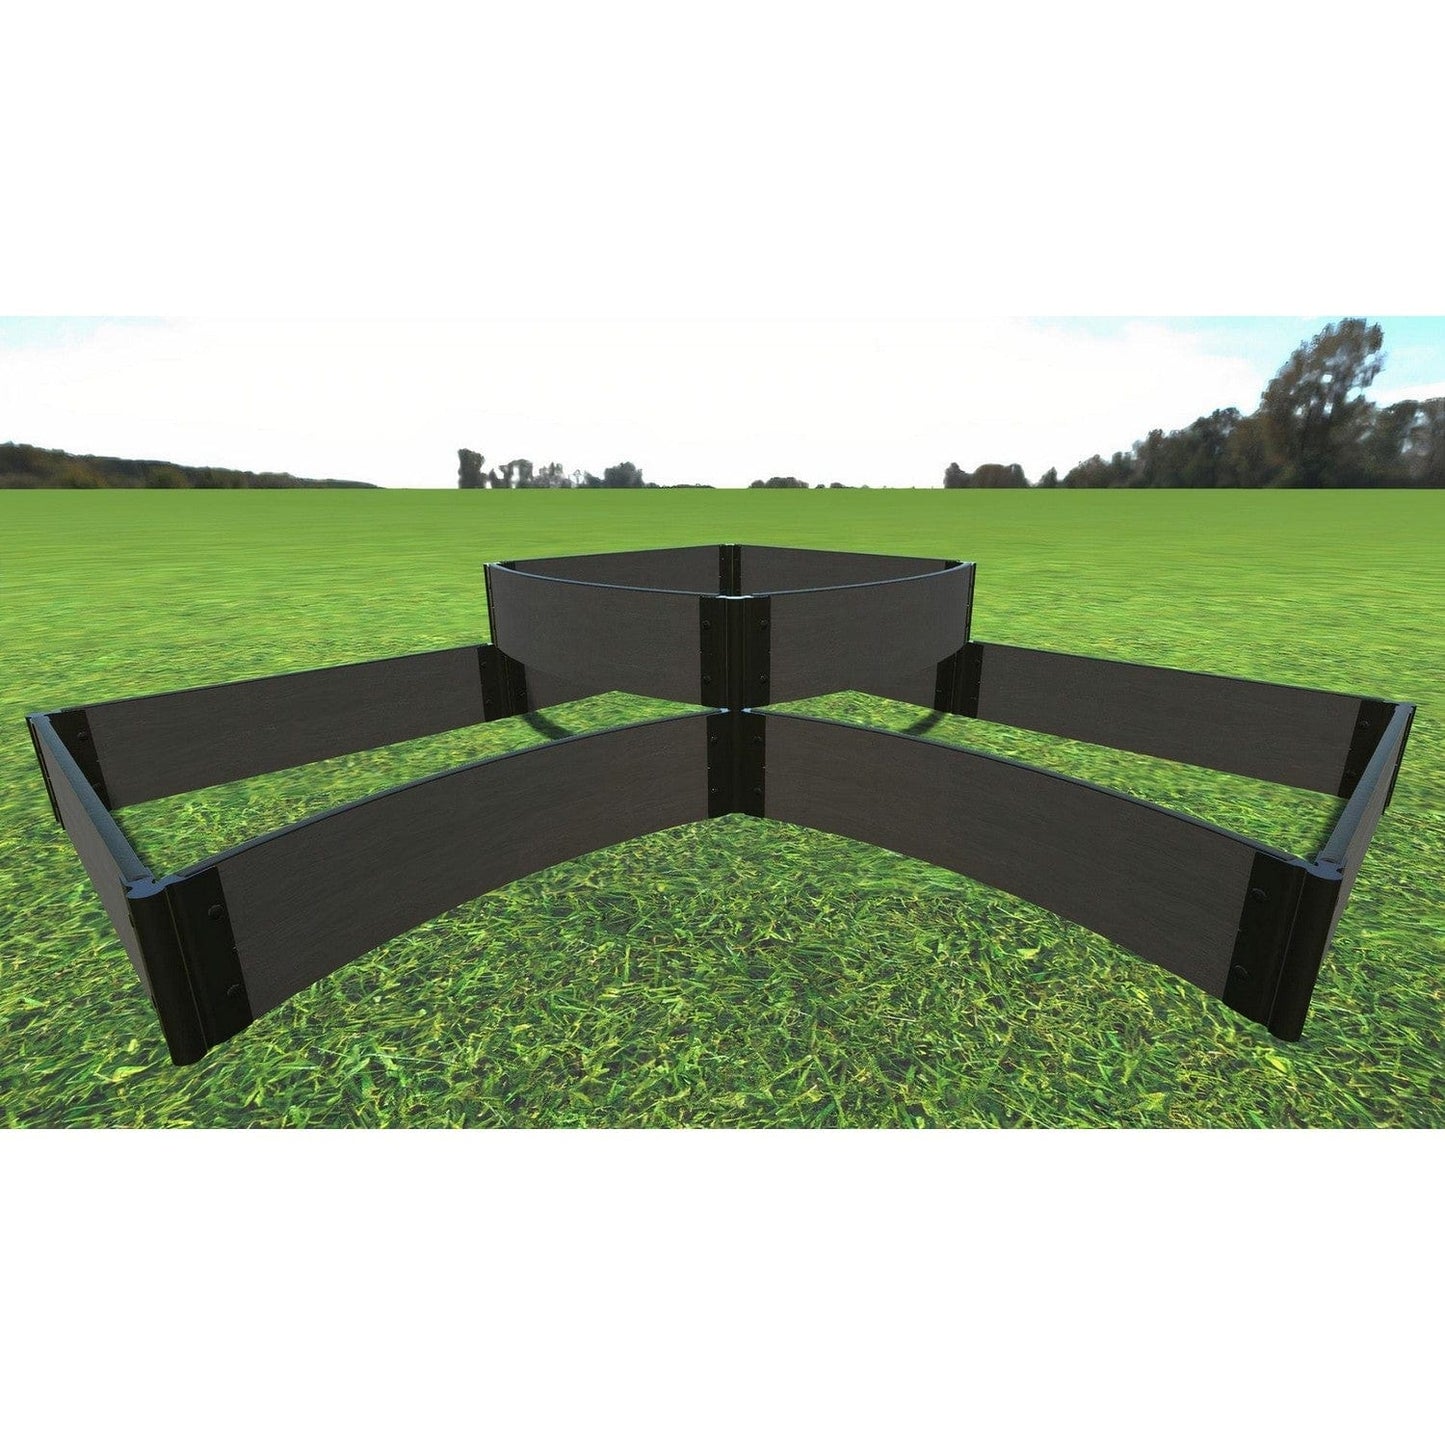 Frame It All Gardening Accessories Frame It All | Tool-Free Teardrop Curved Corner Raised Garden Bed (2-Tier) 8' X 8' X 11" - Weathered Wood - 1" Profile 800002007